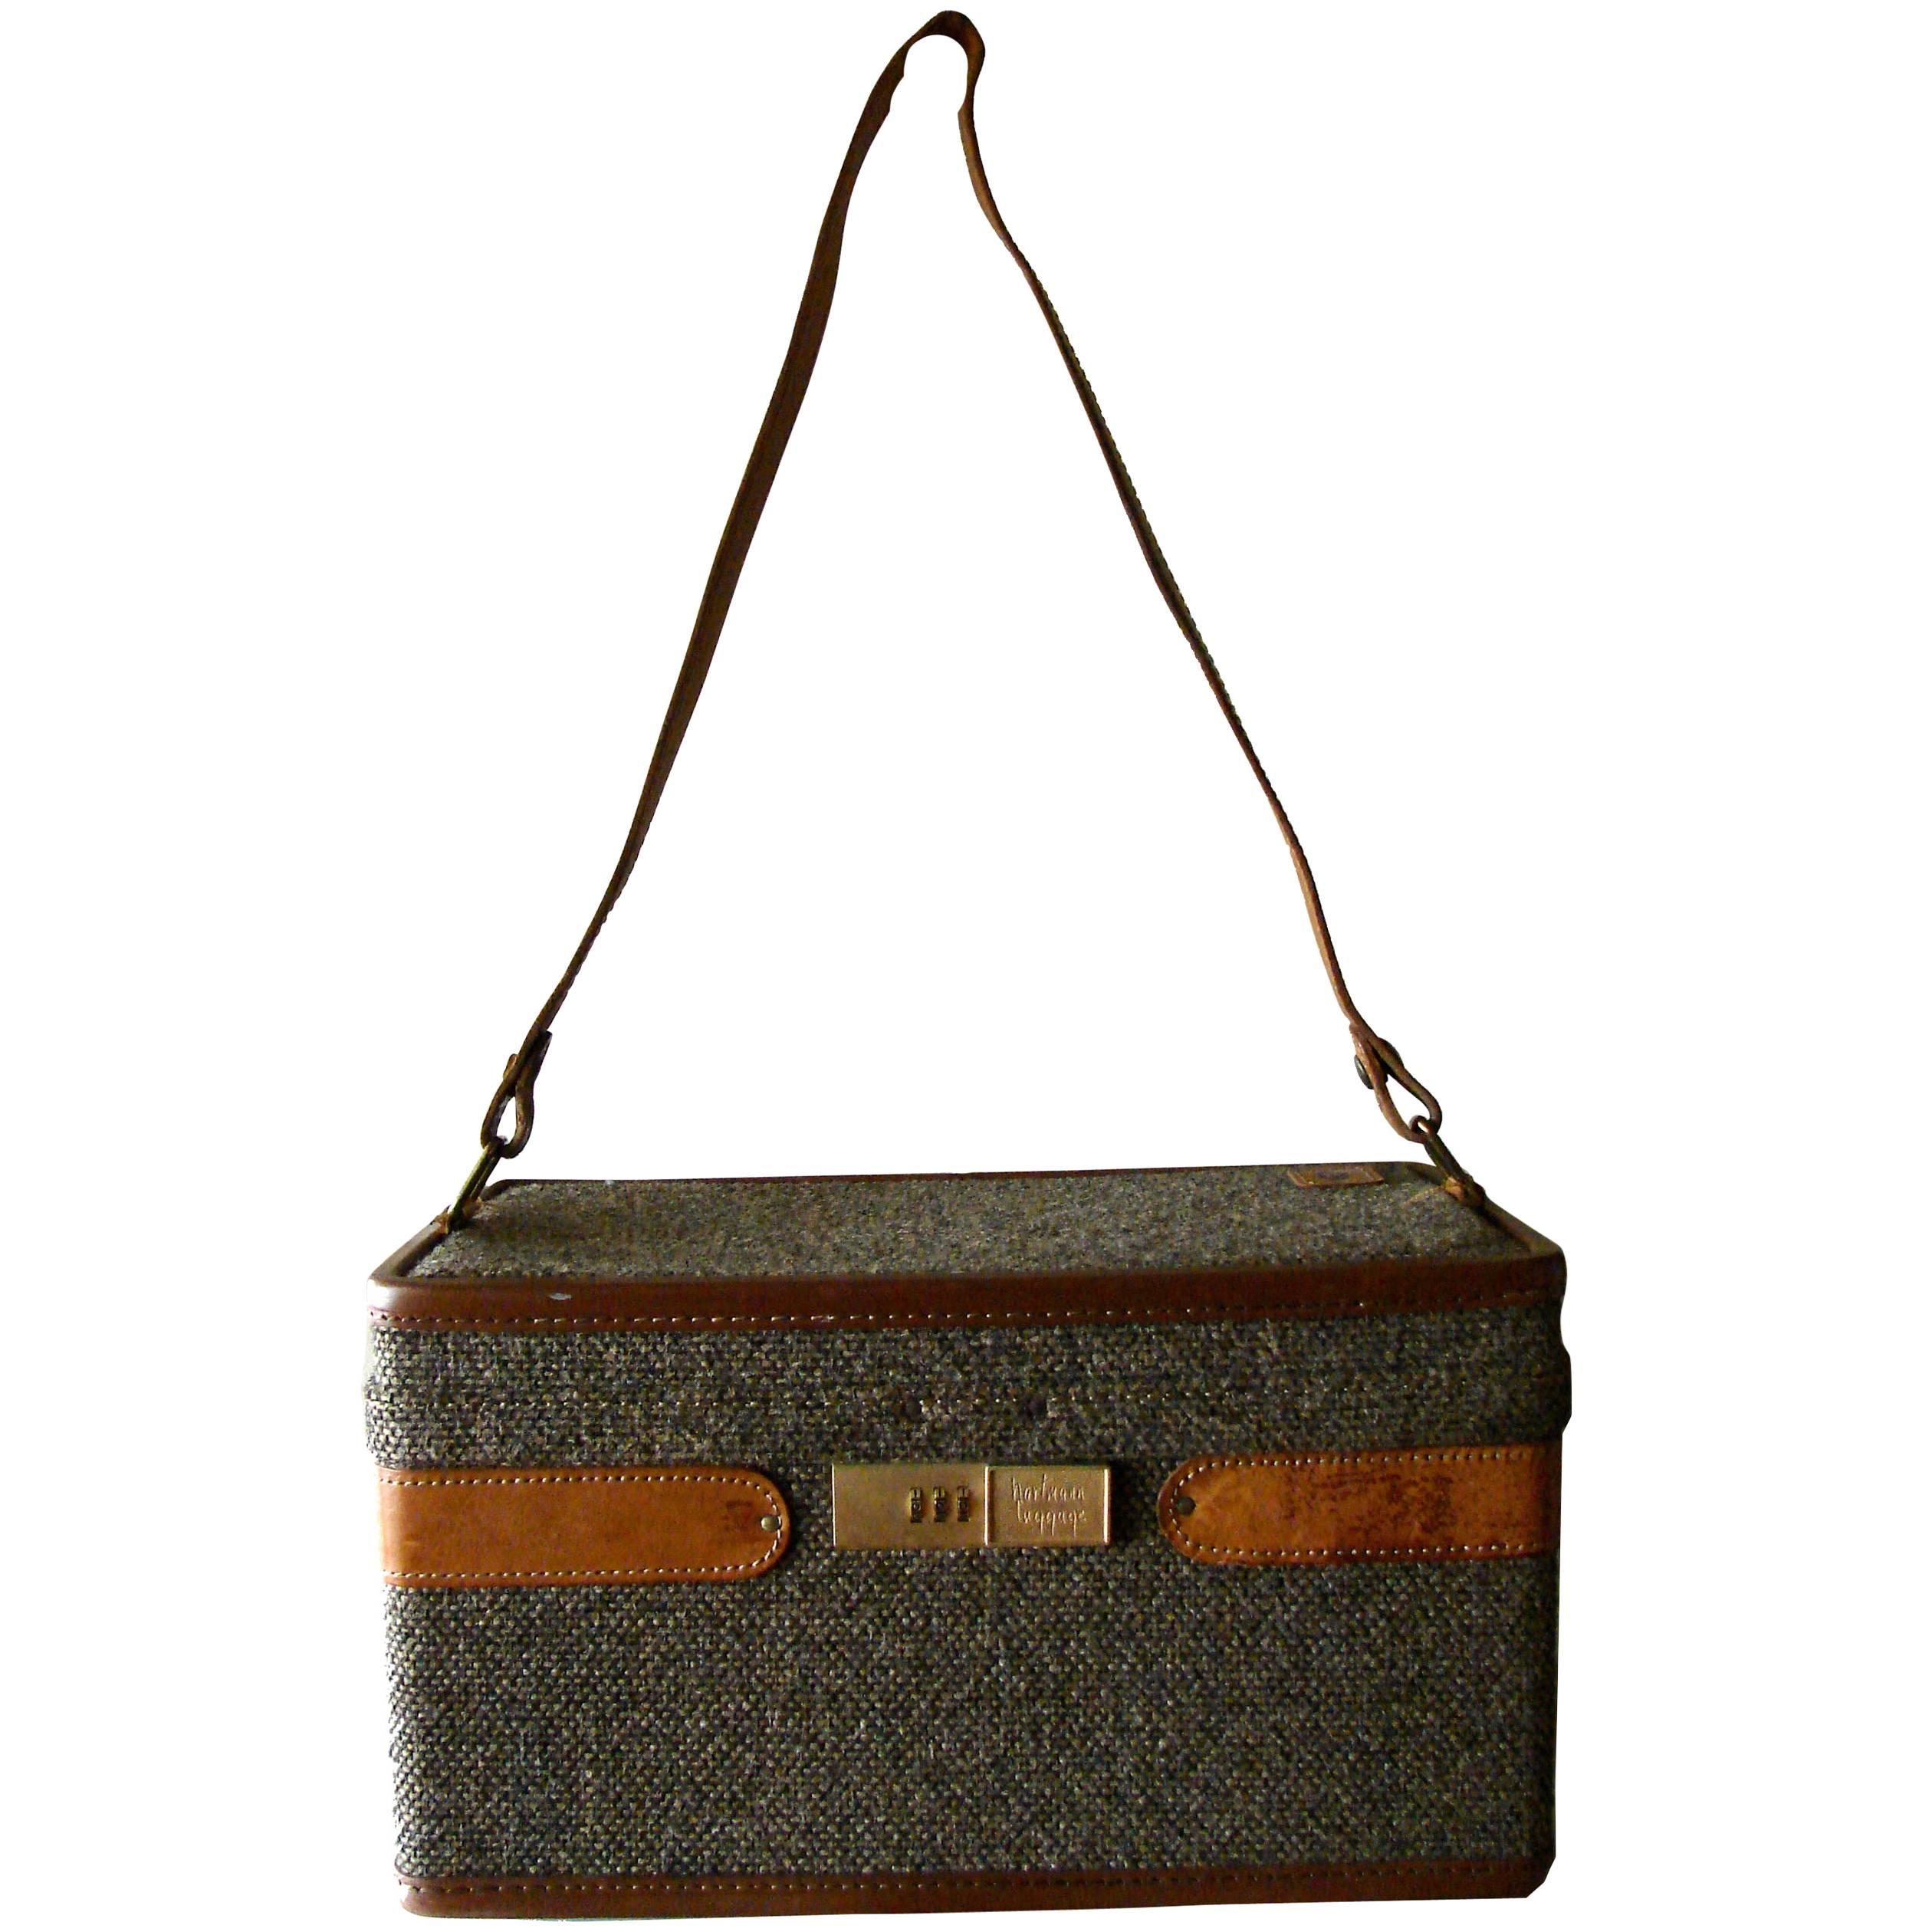 1970s Hartmann Tweed + Leather Train Case with Toile Lining + Adjustable Strap 